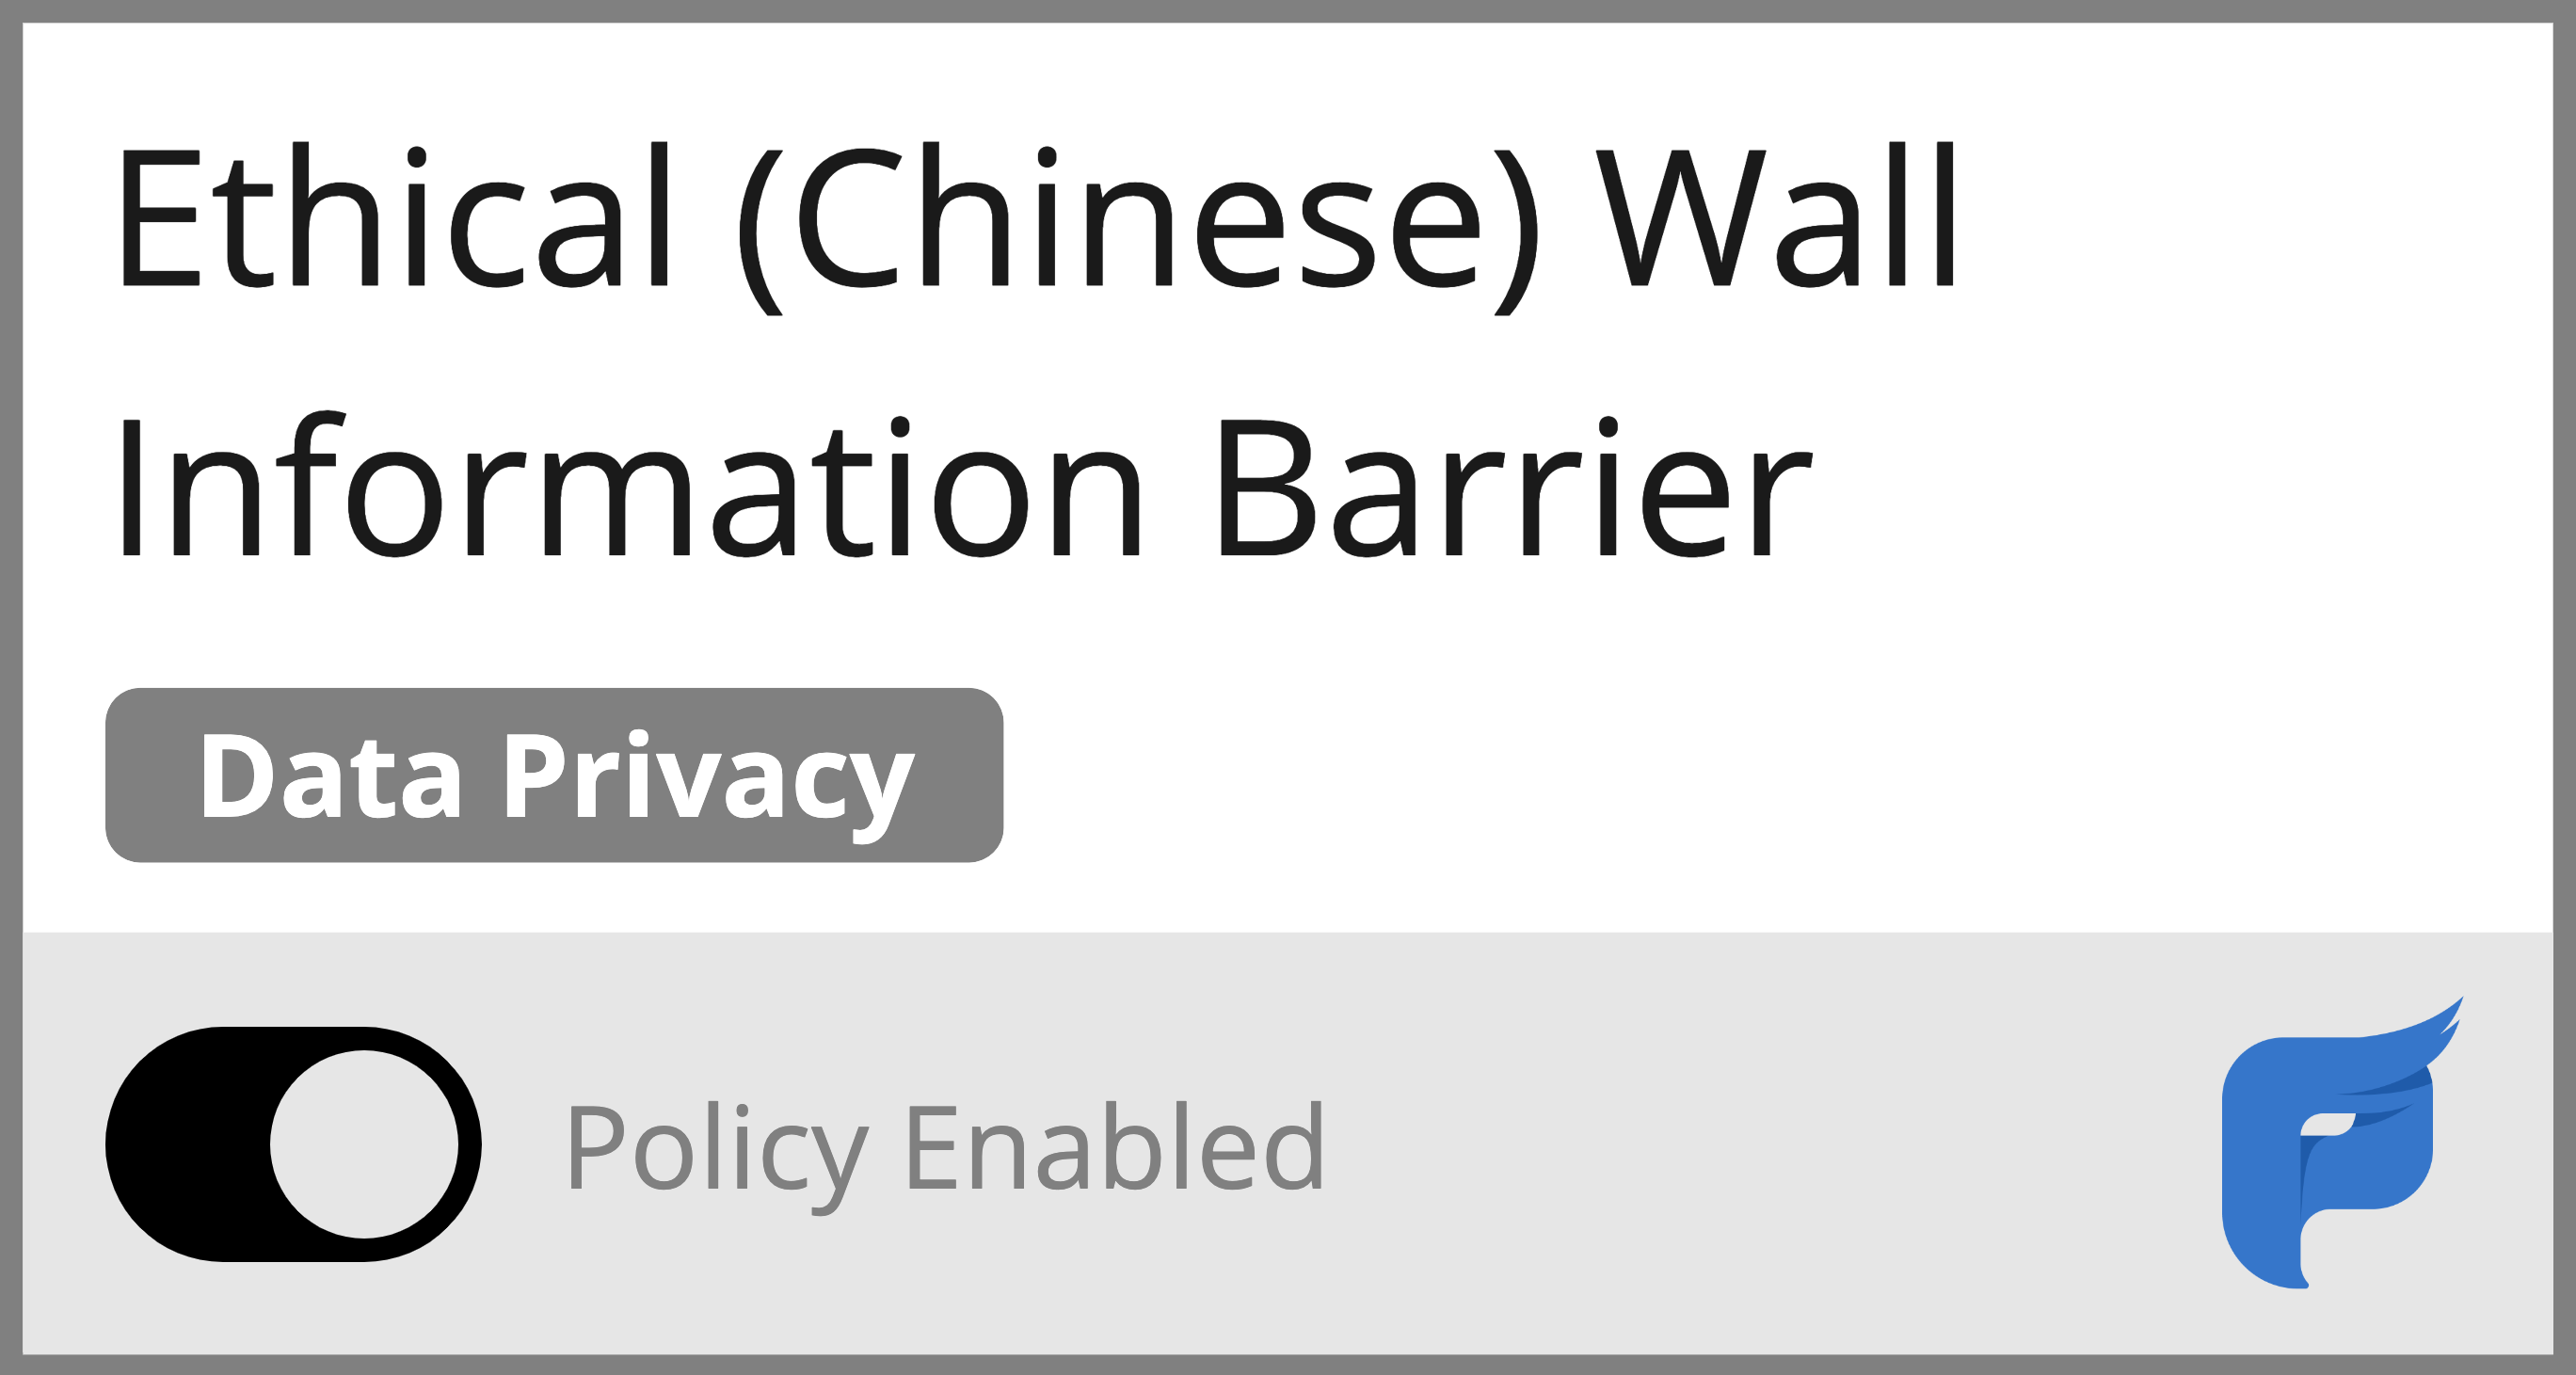 preava-prevent-data-privacy-policy-ethical-chinese-wall-information-barrier